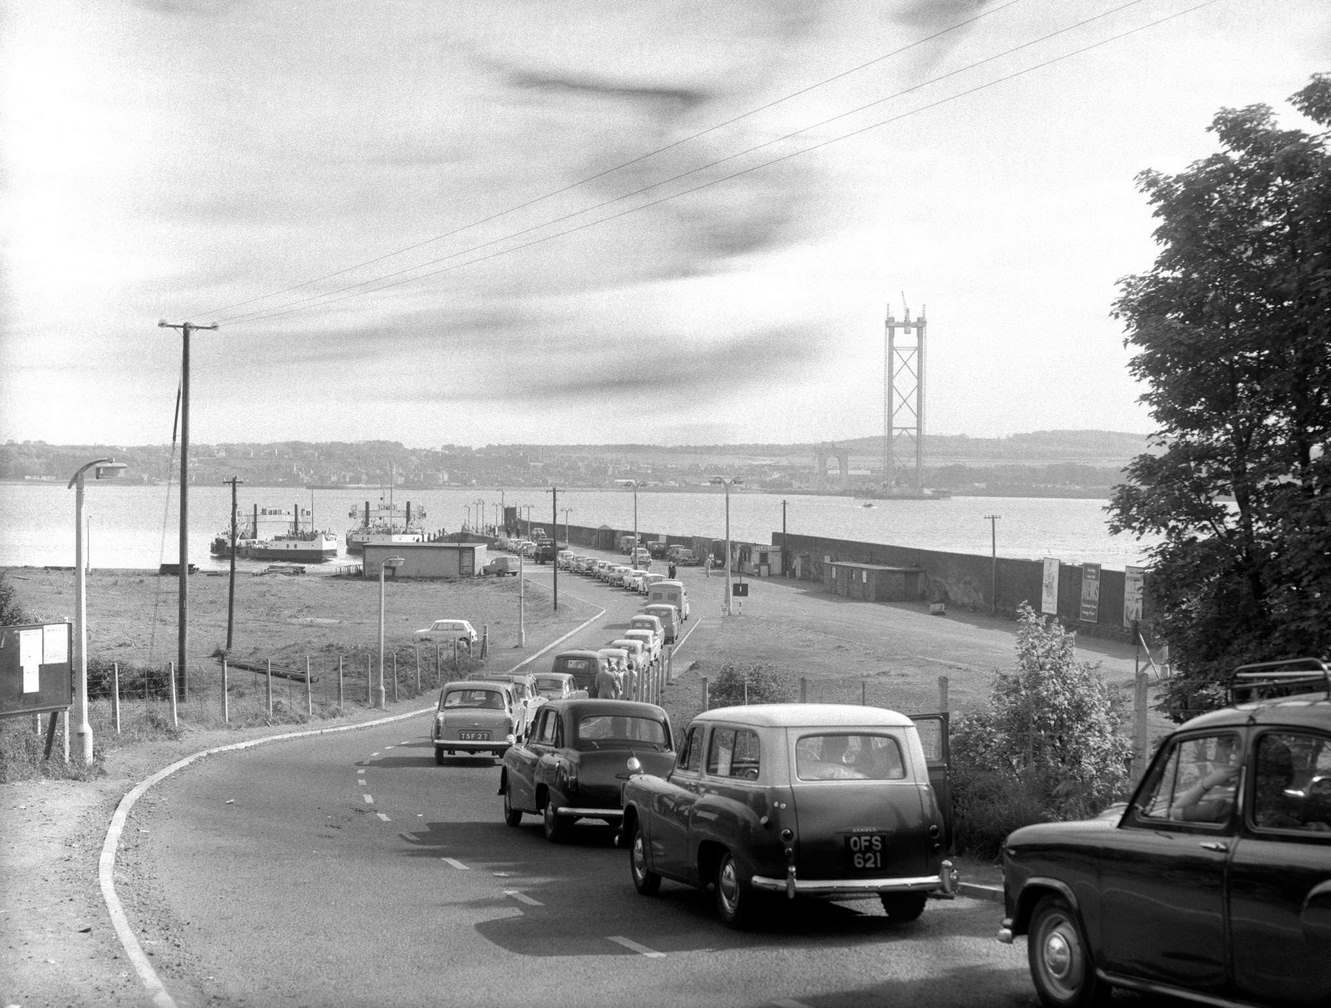 Firth of Forth in Scotland showing the Forth Road Bridge being built, 1960s